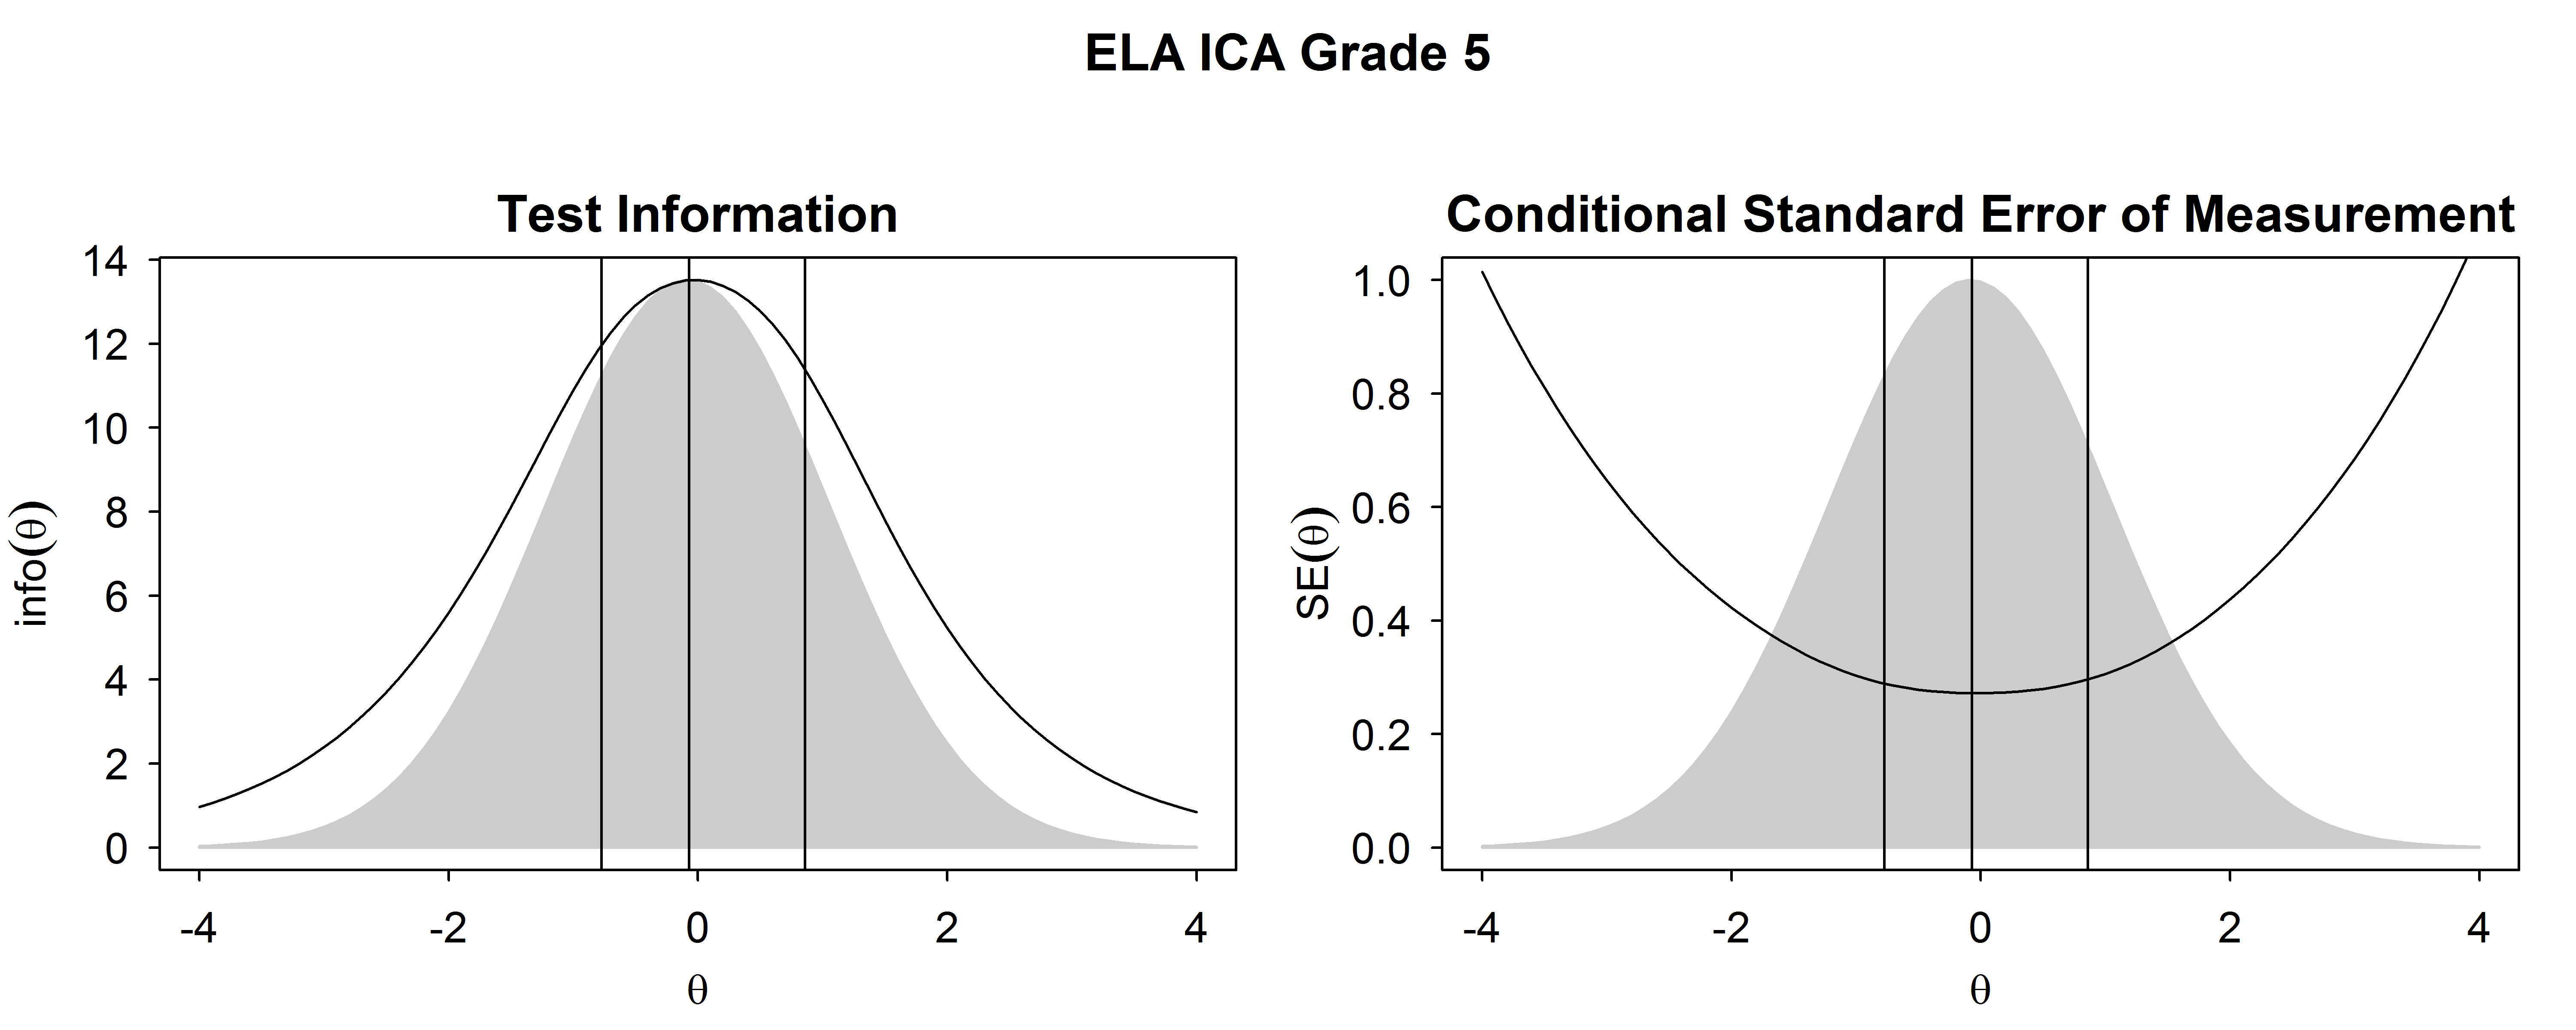 Test Information Functions and SEM For ELA/Literacy ICA, Grade 5